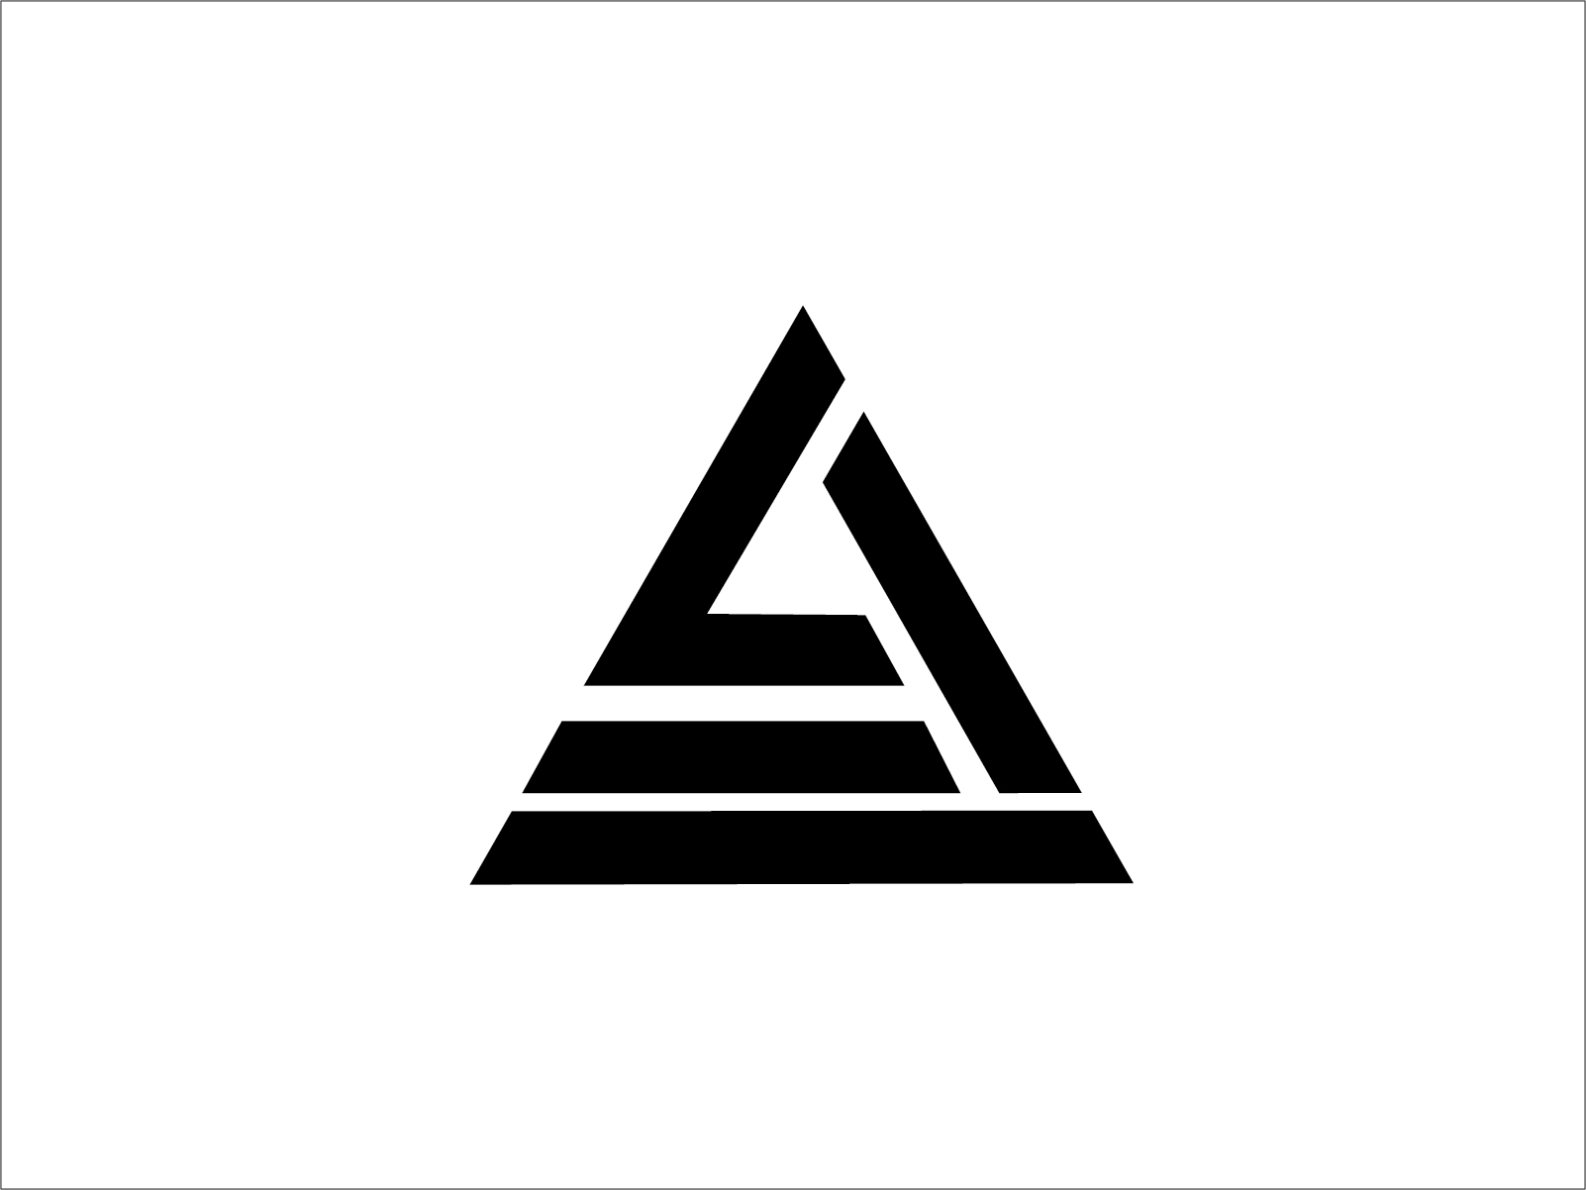 type A shape logo design by Mhammad idrees on Dribbble